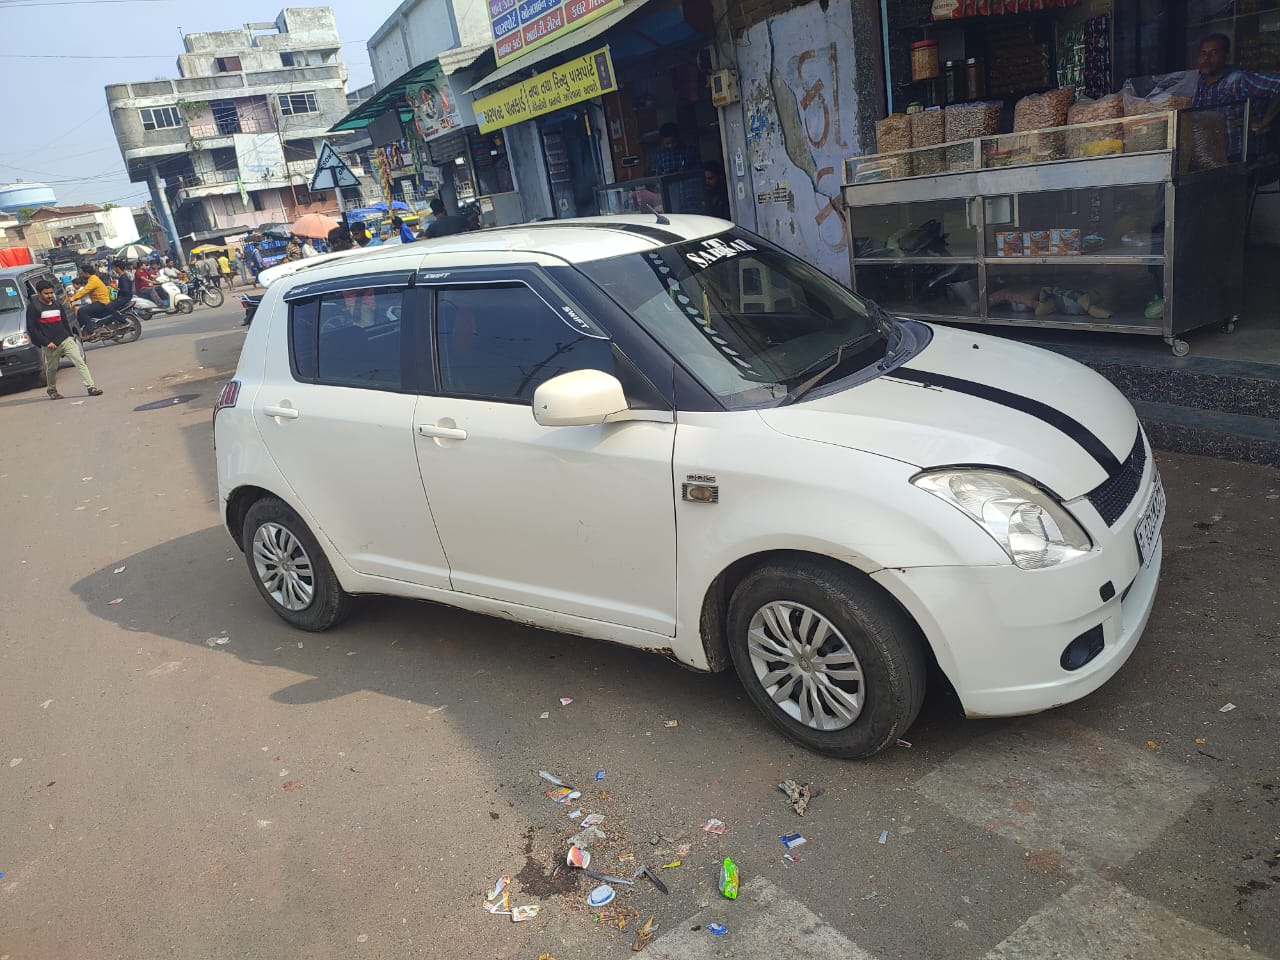 Details View - swift car photos - reseller,reseller marketplace,advetising your products,reseller bazzar,resellerbazzar.in,india's classified site,Diseal swift car | swift car in gujarat | old swift car